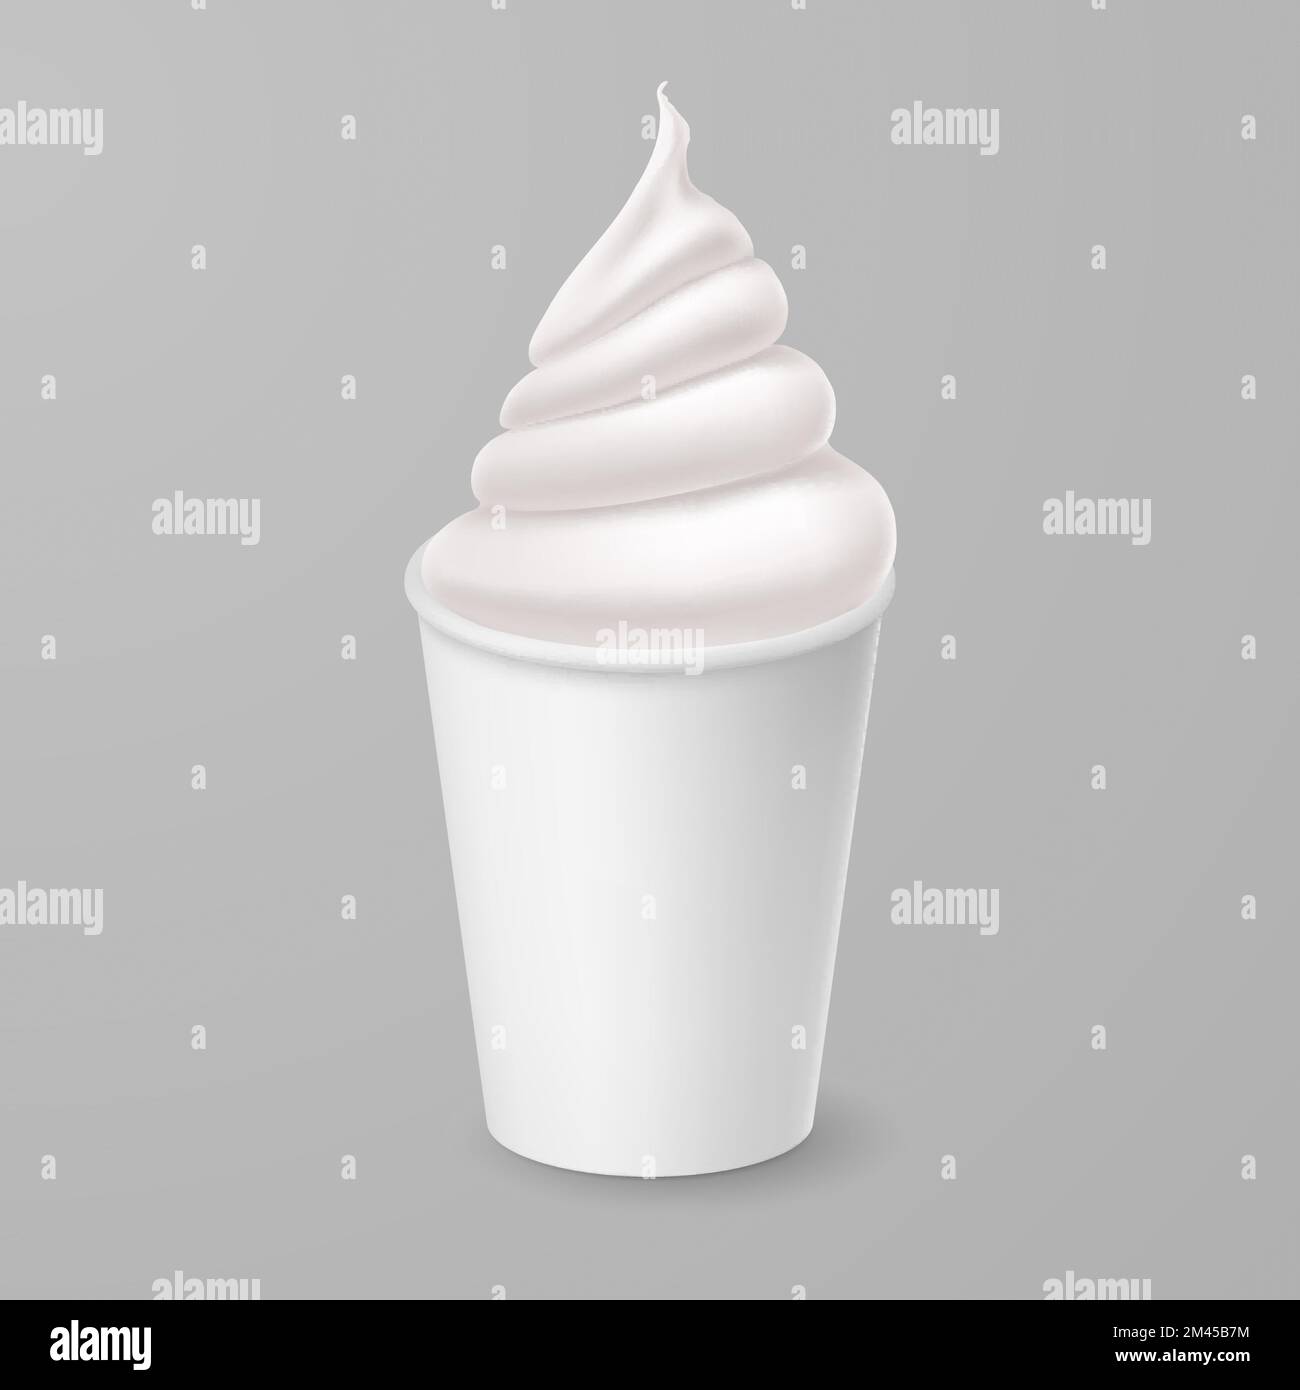 Whipped Vanilla Frozen Yogurt or Soft Ice Cream Mockup in White Paper Cup. Isolated Illustration on Gray Backdrop Stock Vector